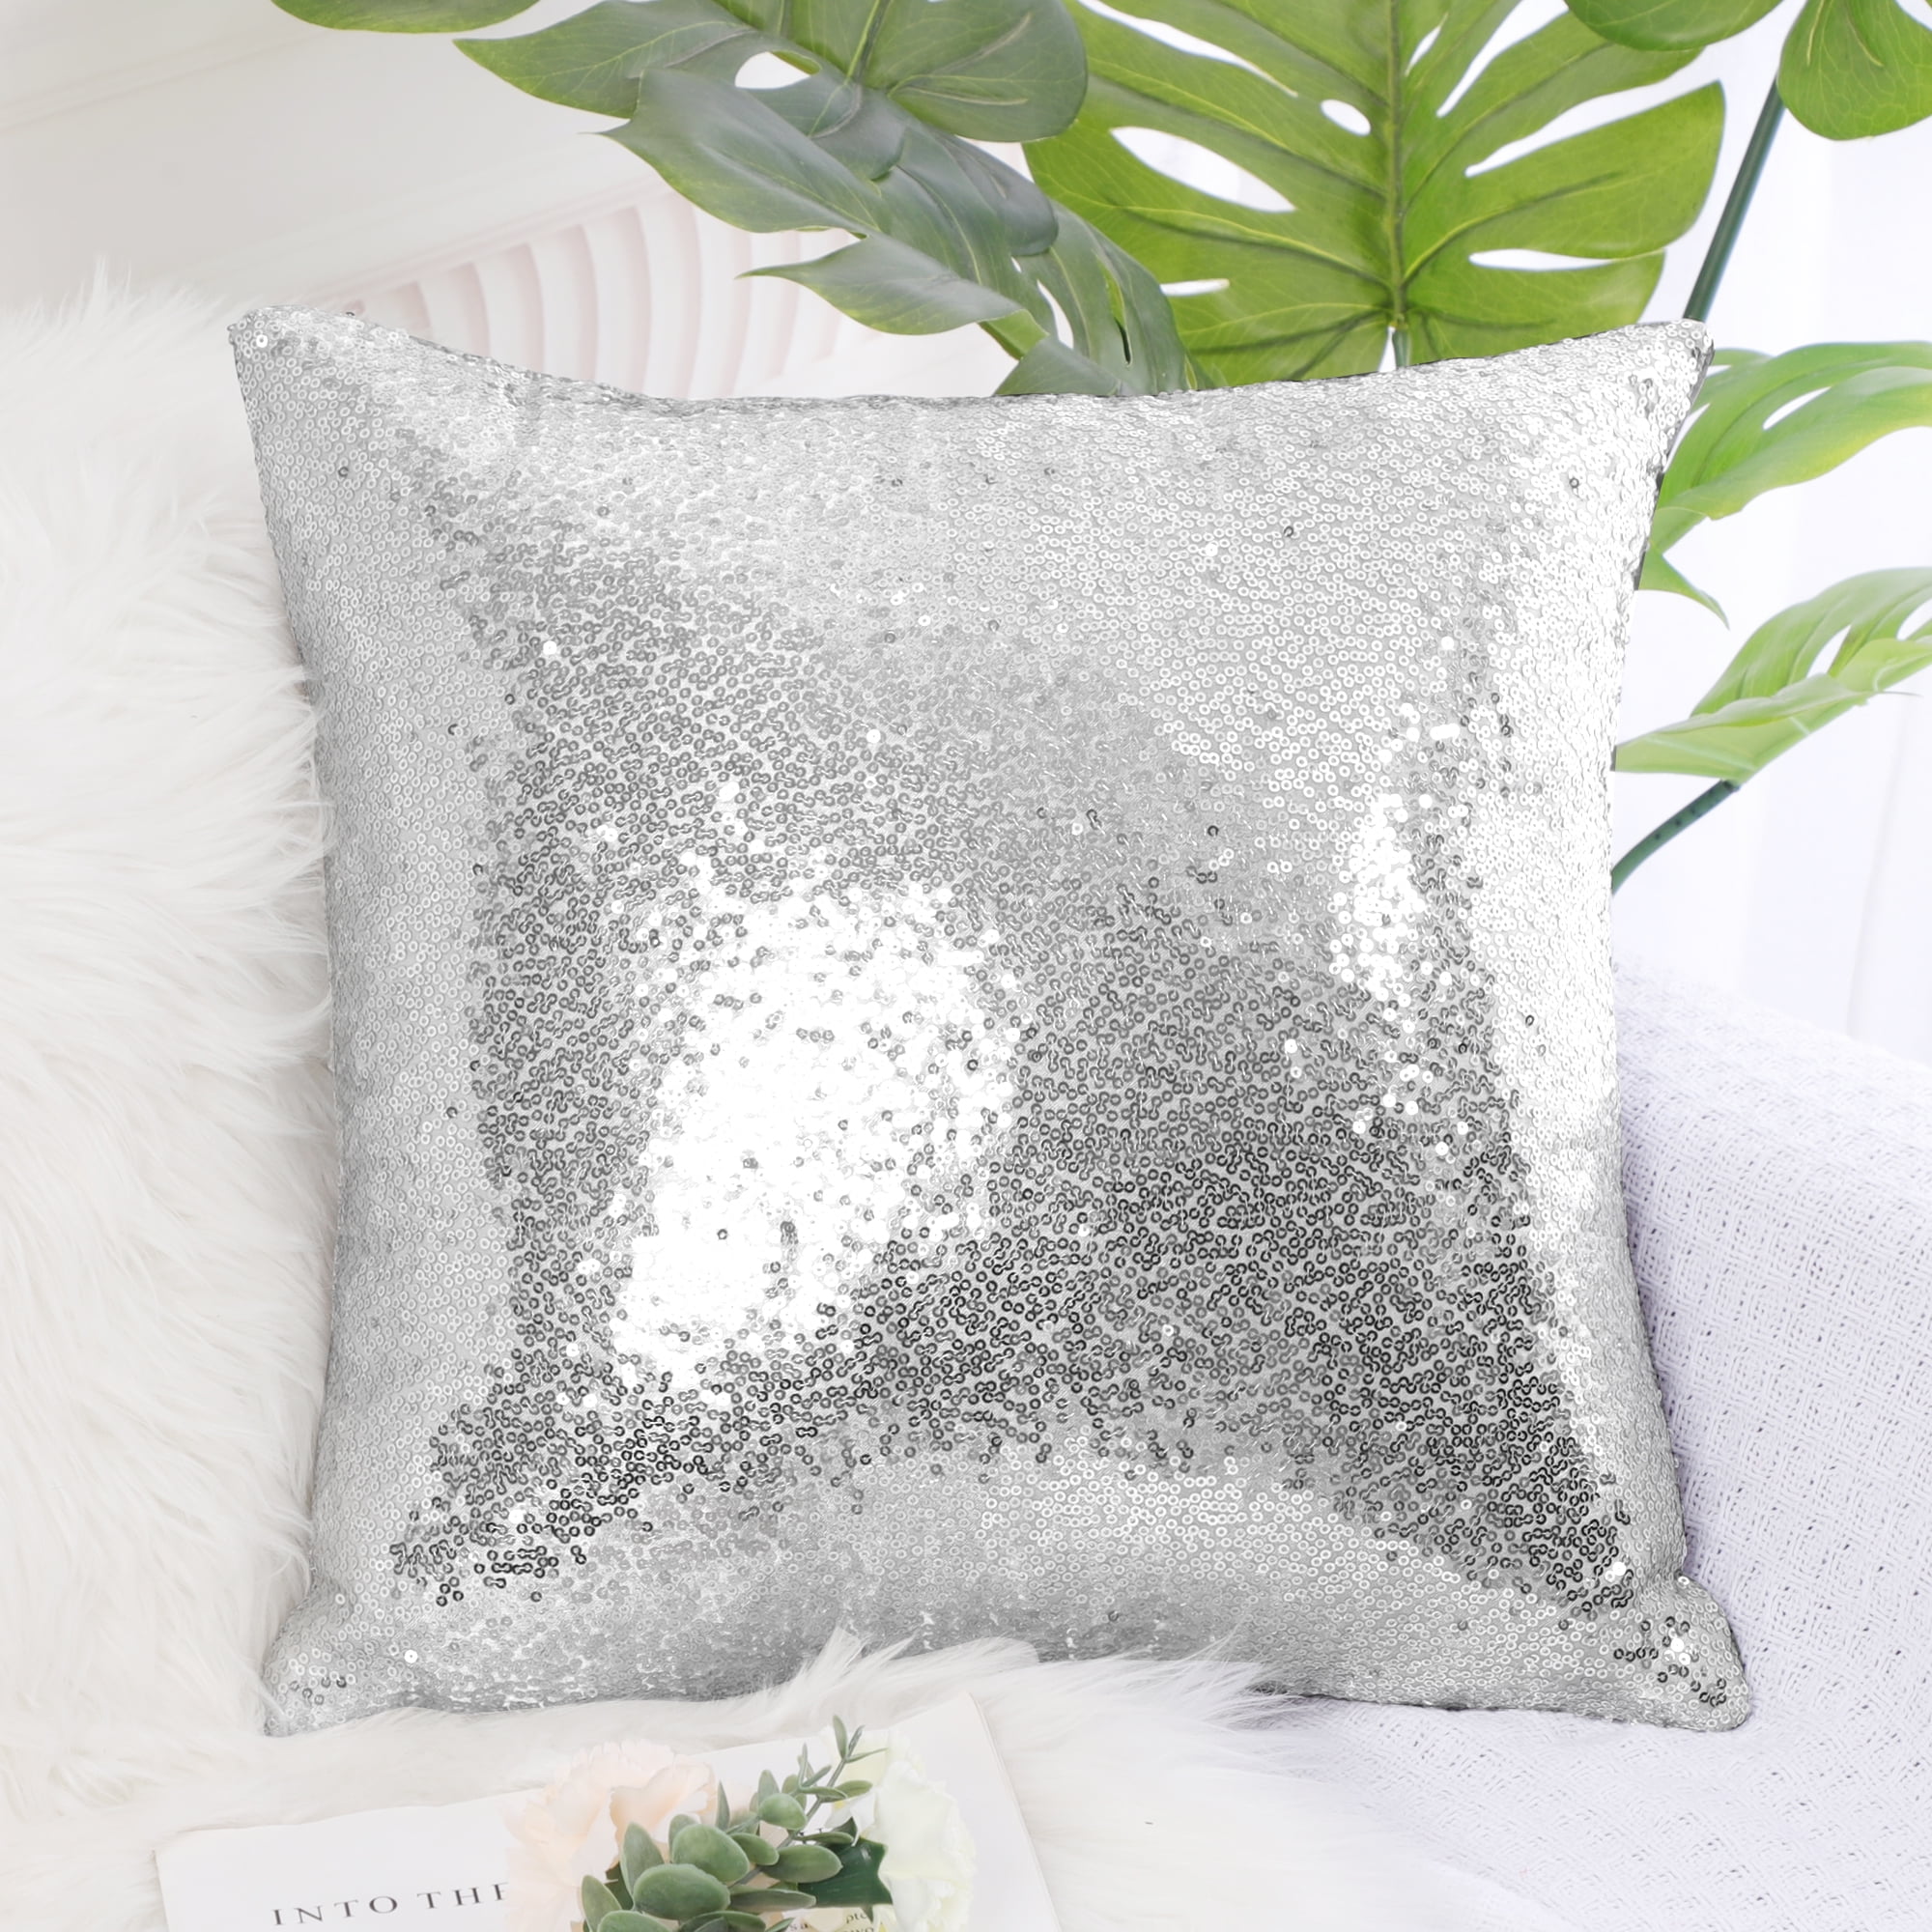 PERSONALISED CUSHION GREY SILVER CRUSHED VELVET GIFT RESERVED FOR DAD CHRISTMAS 